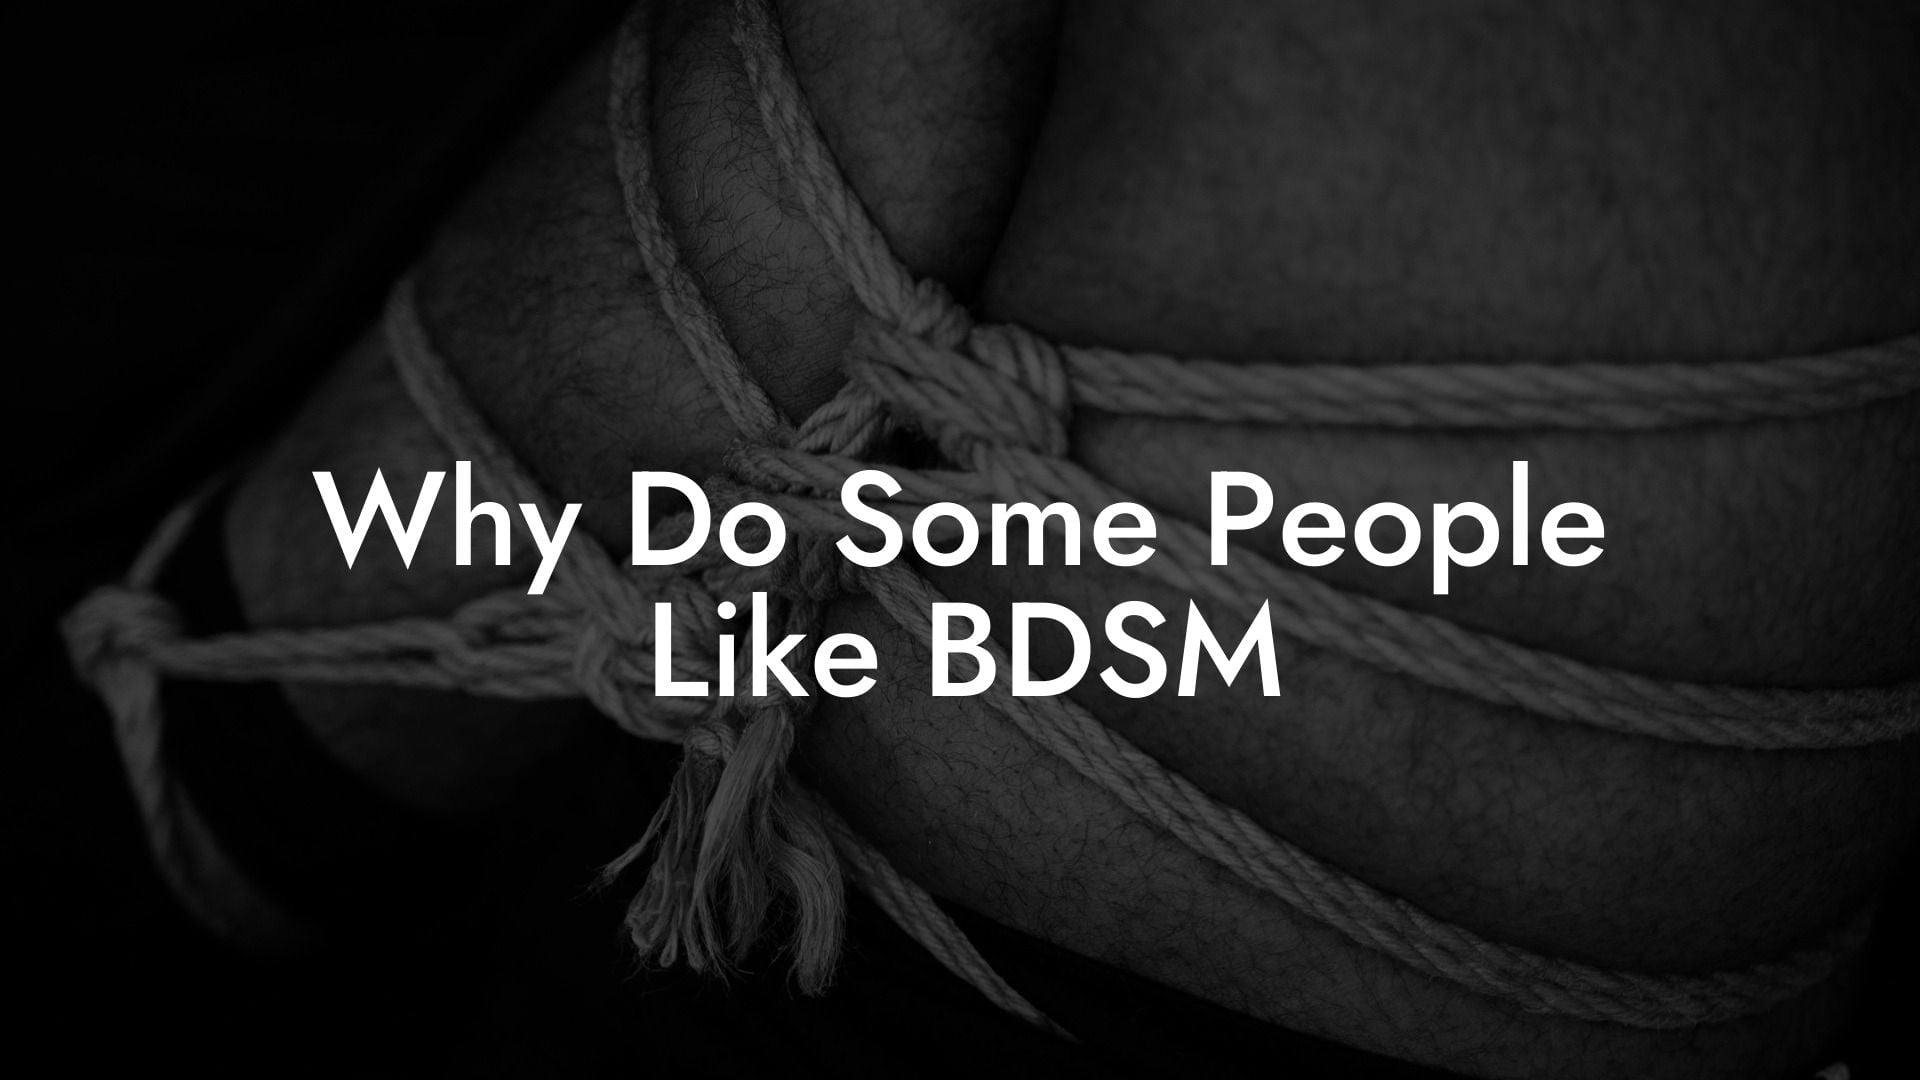 Why Do Some People Like BDSM